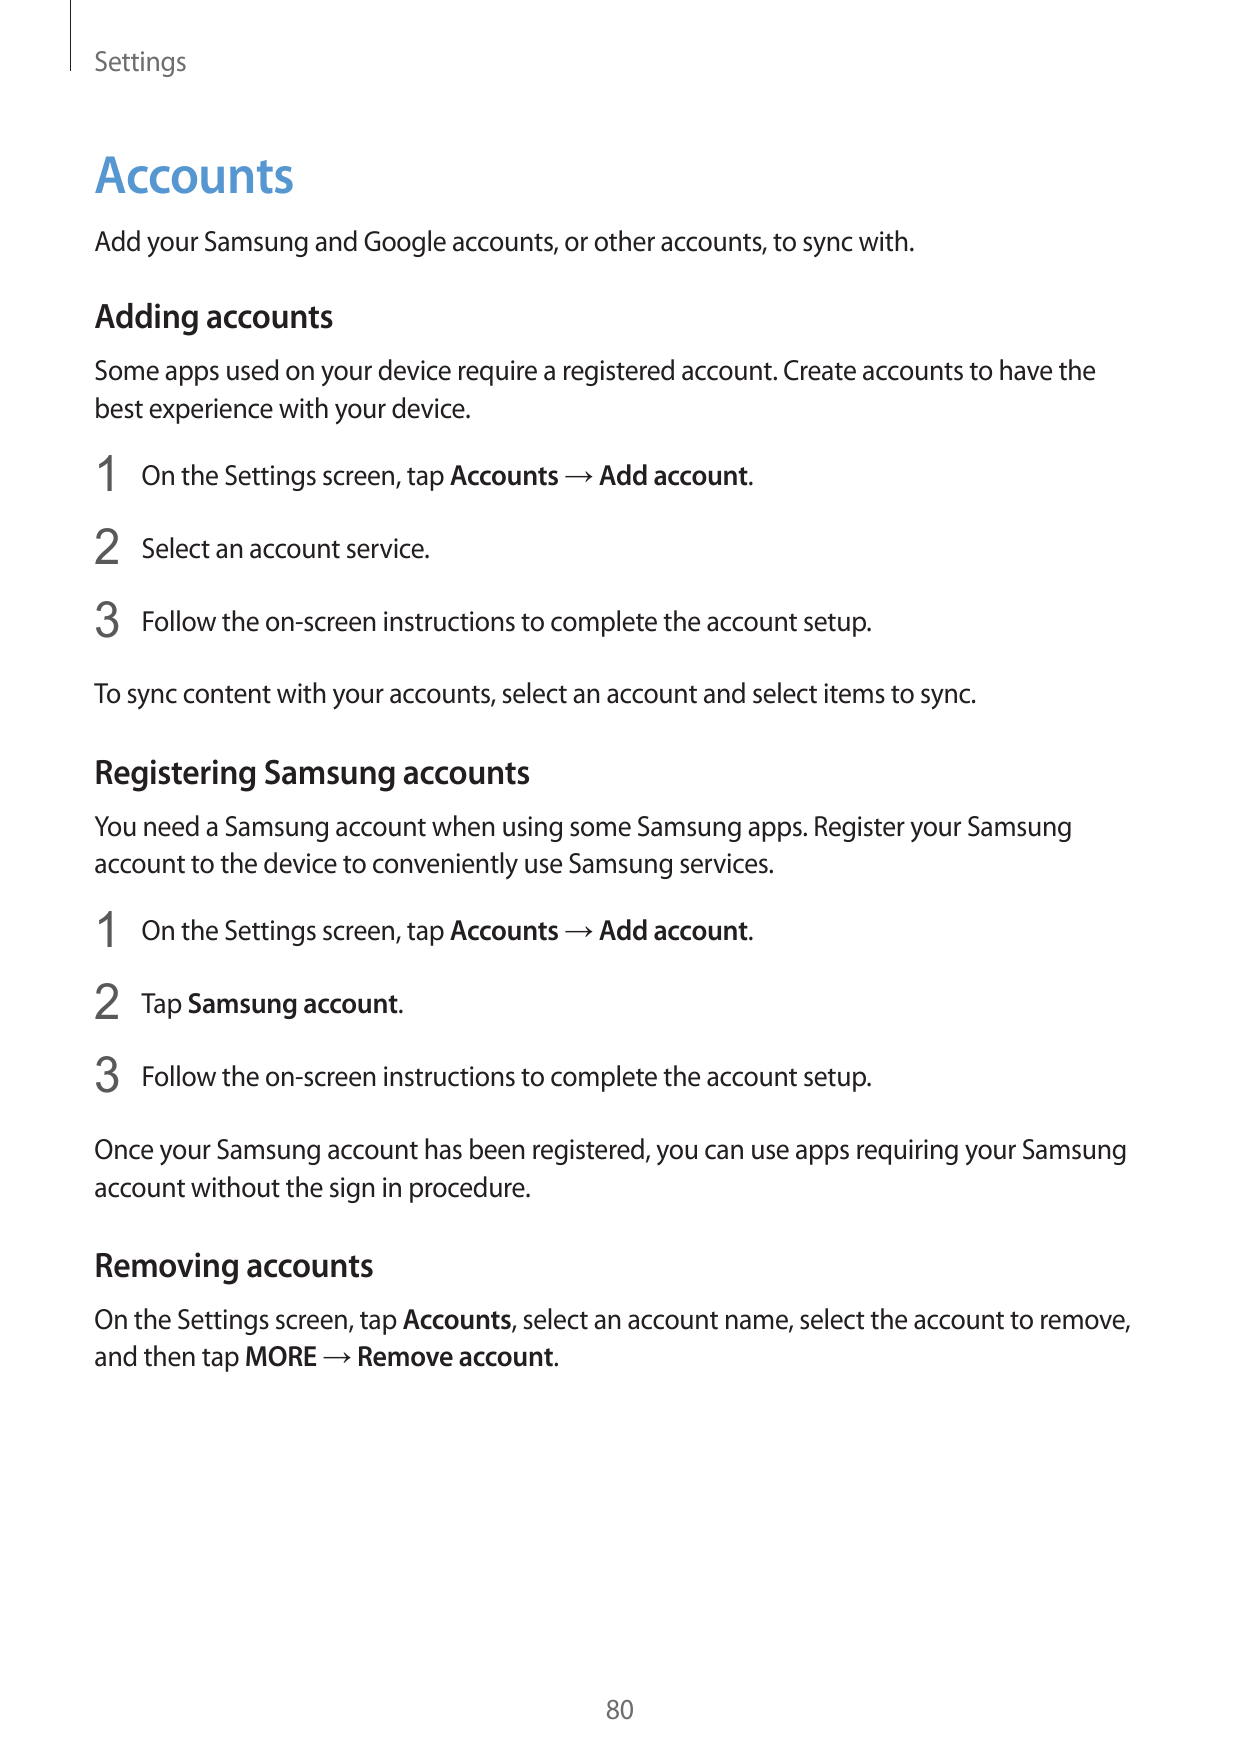 SettingsAccountsAdd your Samsung and Google accounts, or other accounts, to sync with.Adding accountsSome apps used on your devi